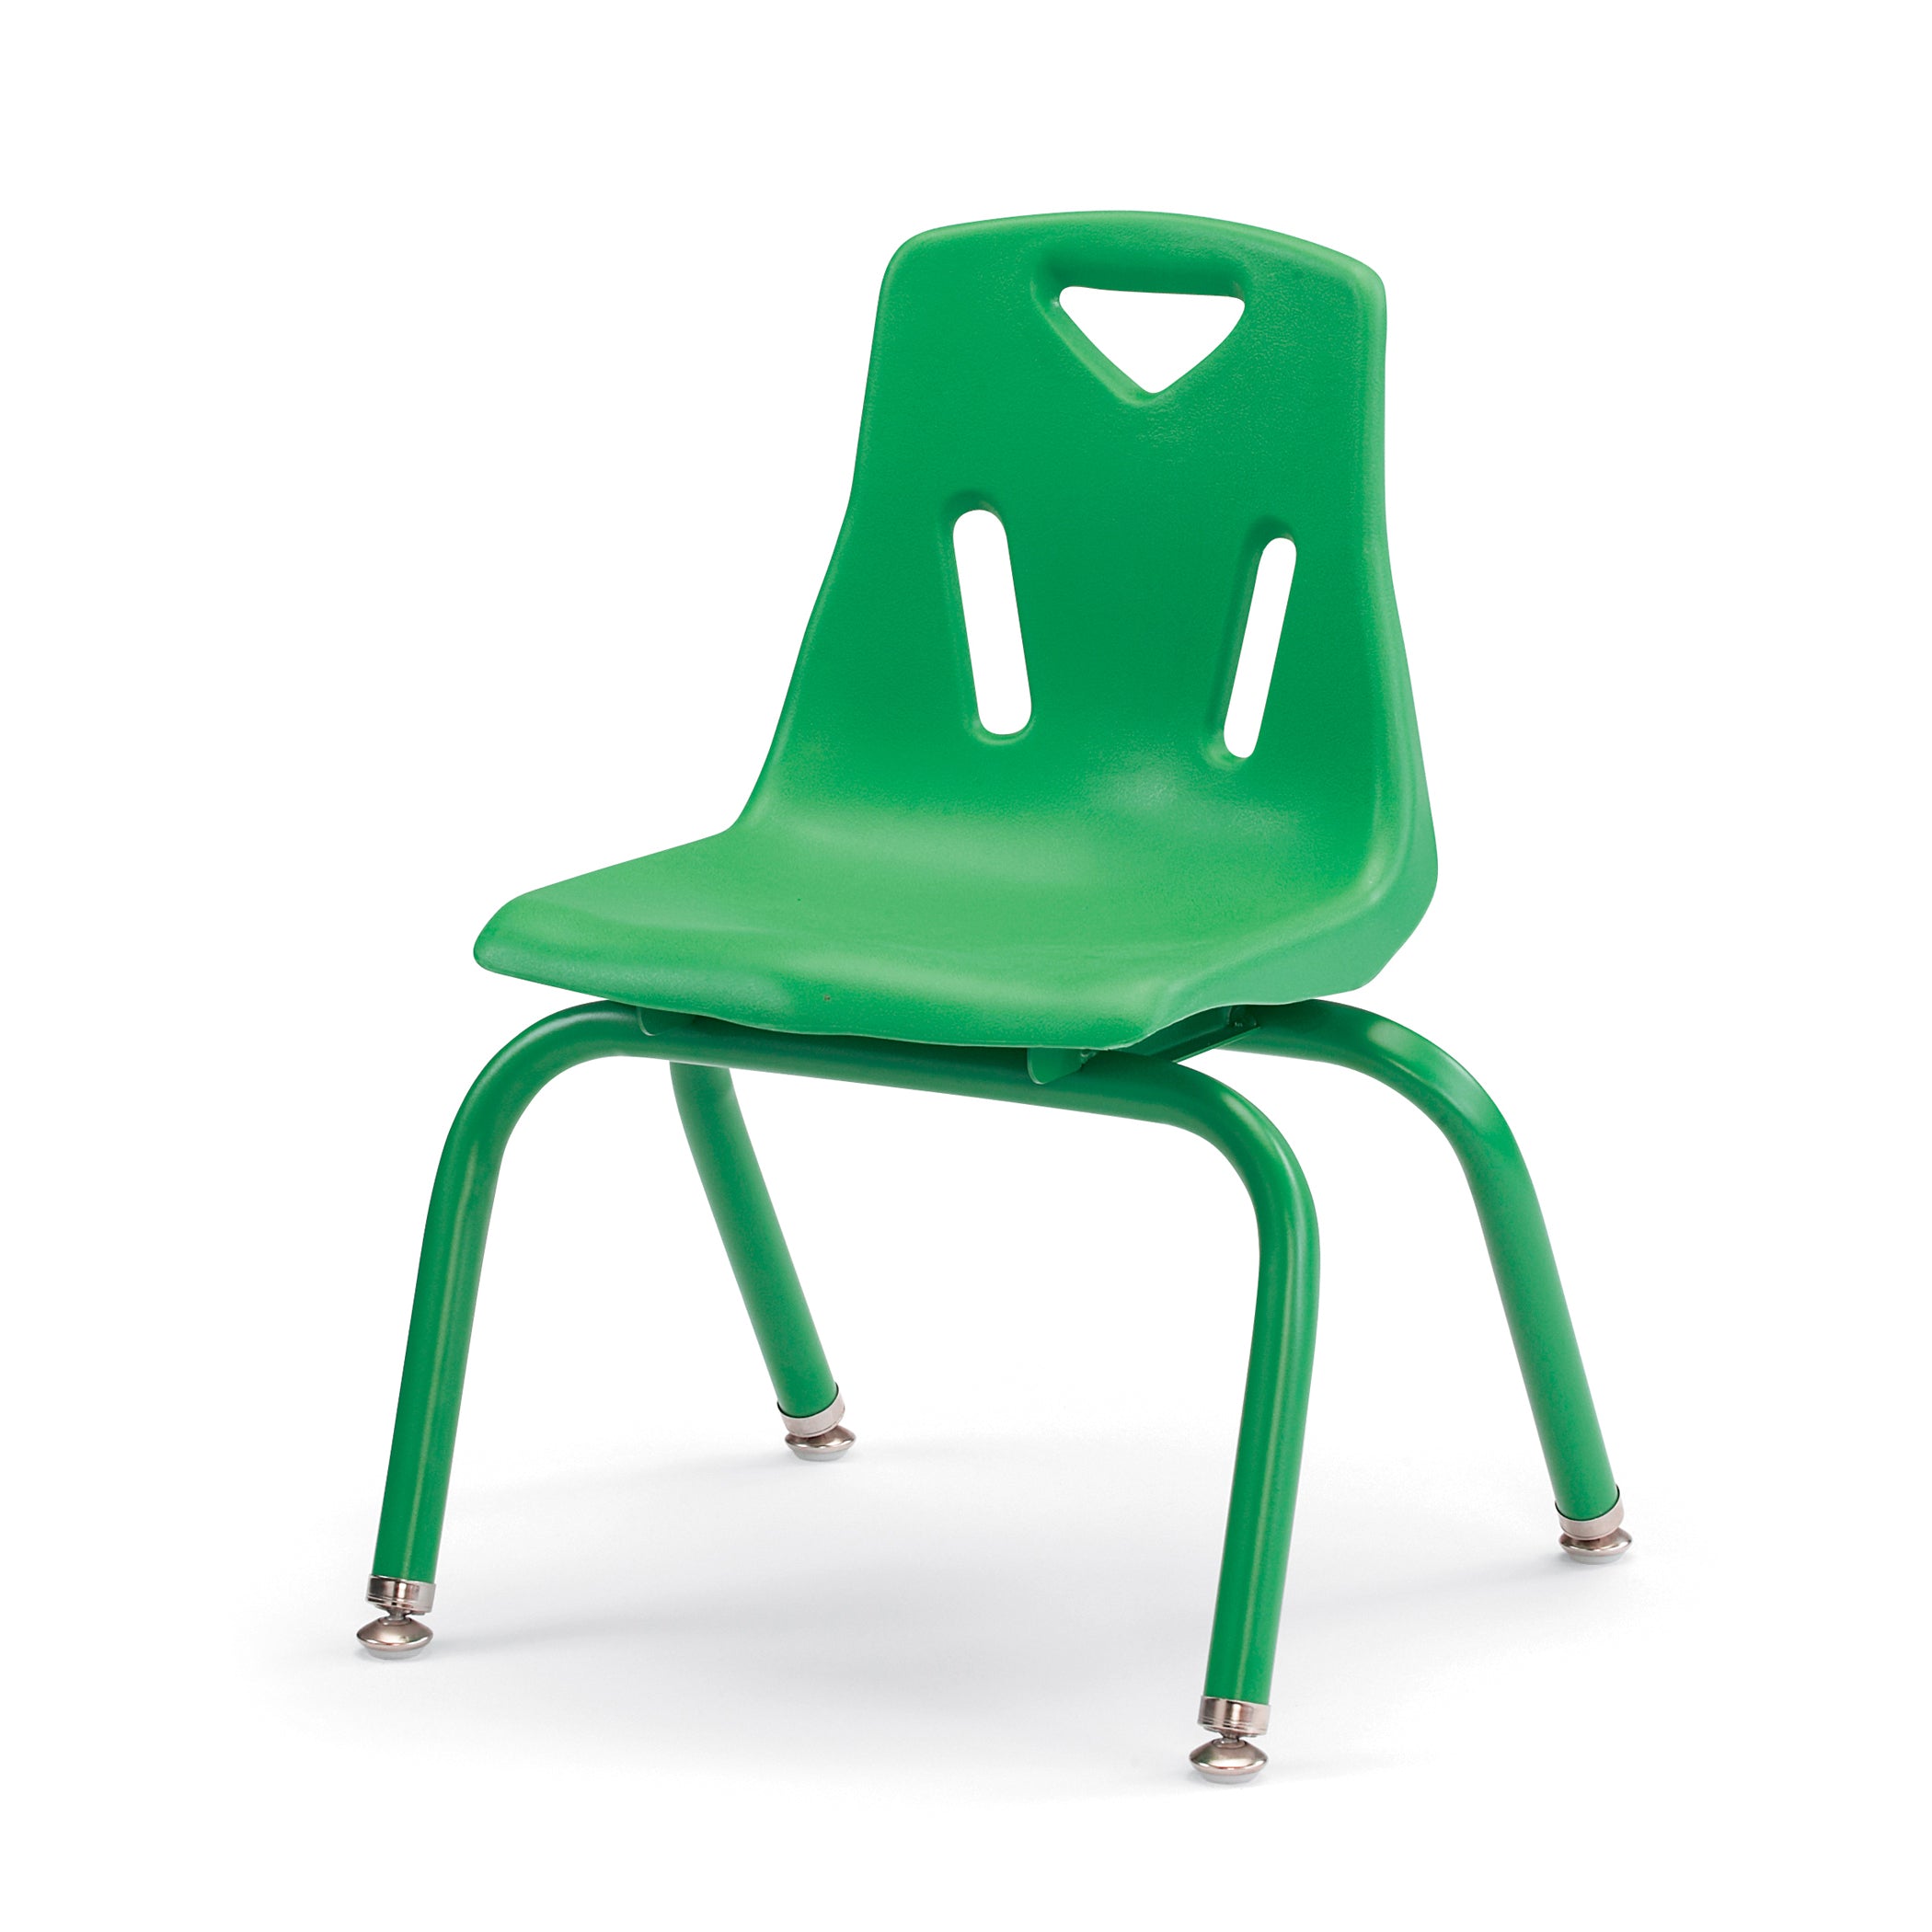 8122JC6119, Berries Stacking Chairs with Powder-Coated Legs - 12" Ht - Set of 6 - Green